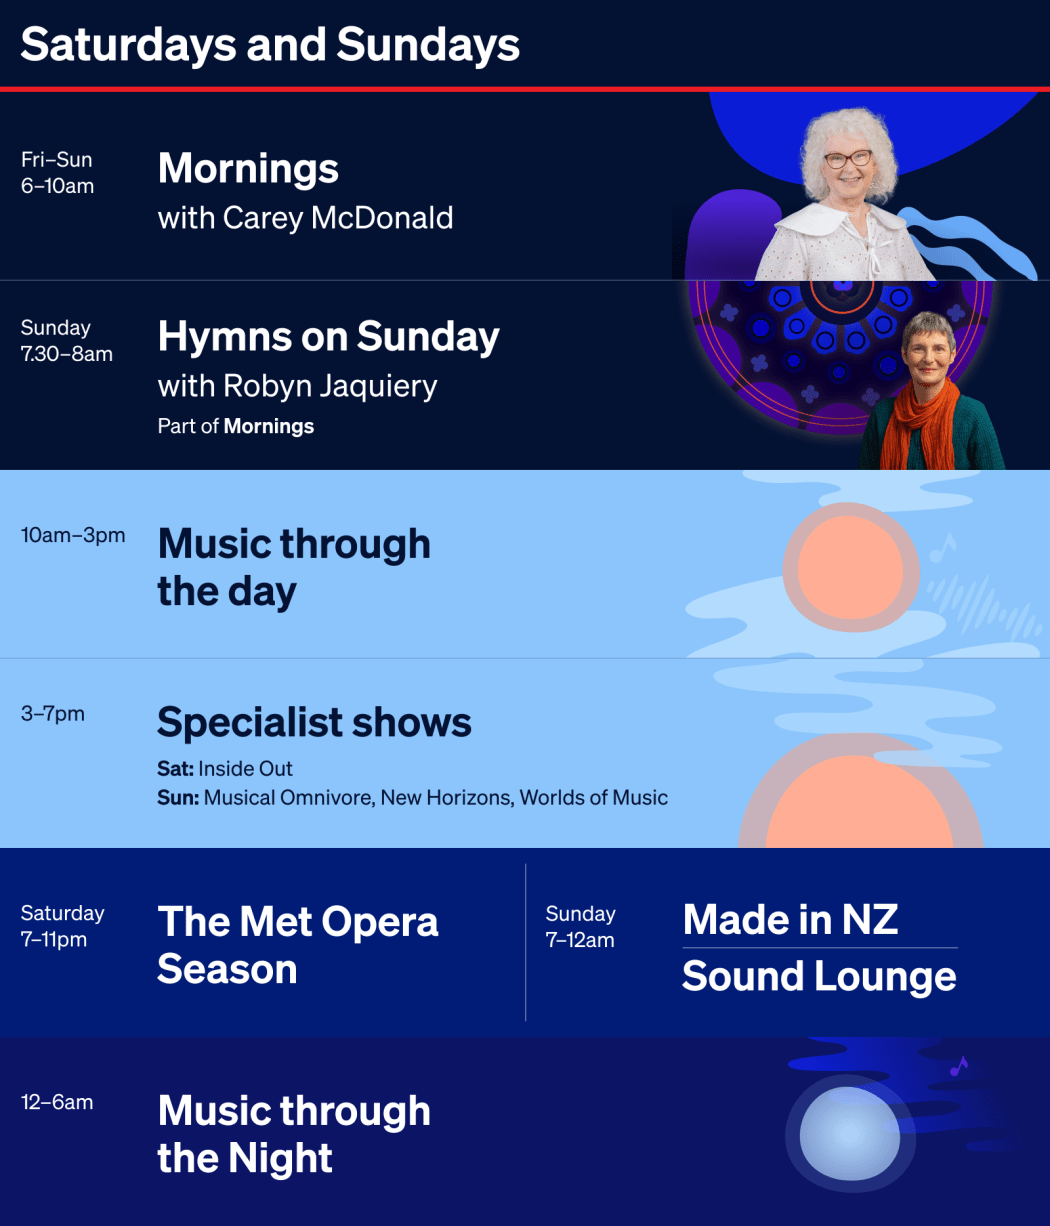 Saturdays and Sundays on RNZ Concert:
6-10am Mornings with Carey McDonald (as well as on Fridays)
Sundays: 7.30-8am Hymns on Sunday with Robyn Jaquiery (Part of Mornings)
10am-3pm Music though the day
3-7pm Saturdays: Inside Out
3-7 pm Sundays: Musical Omnivore, New Horizons, Worlds of Music
Saturday 7-11pm The Met Opera Season
Sunday 
7-9 pm Made in NZ
9-12am Sound Lounge
Every day: 12-6am Music through the Night